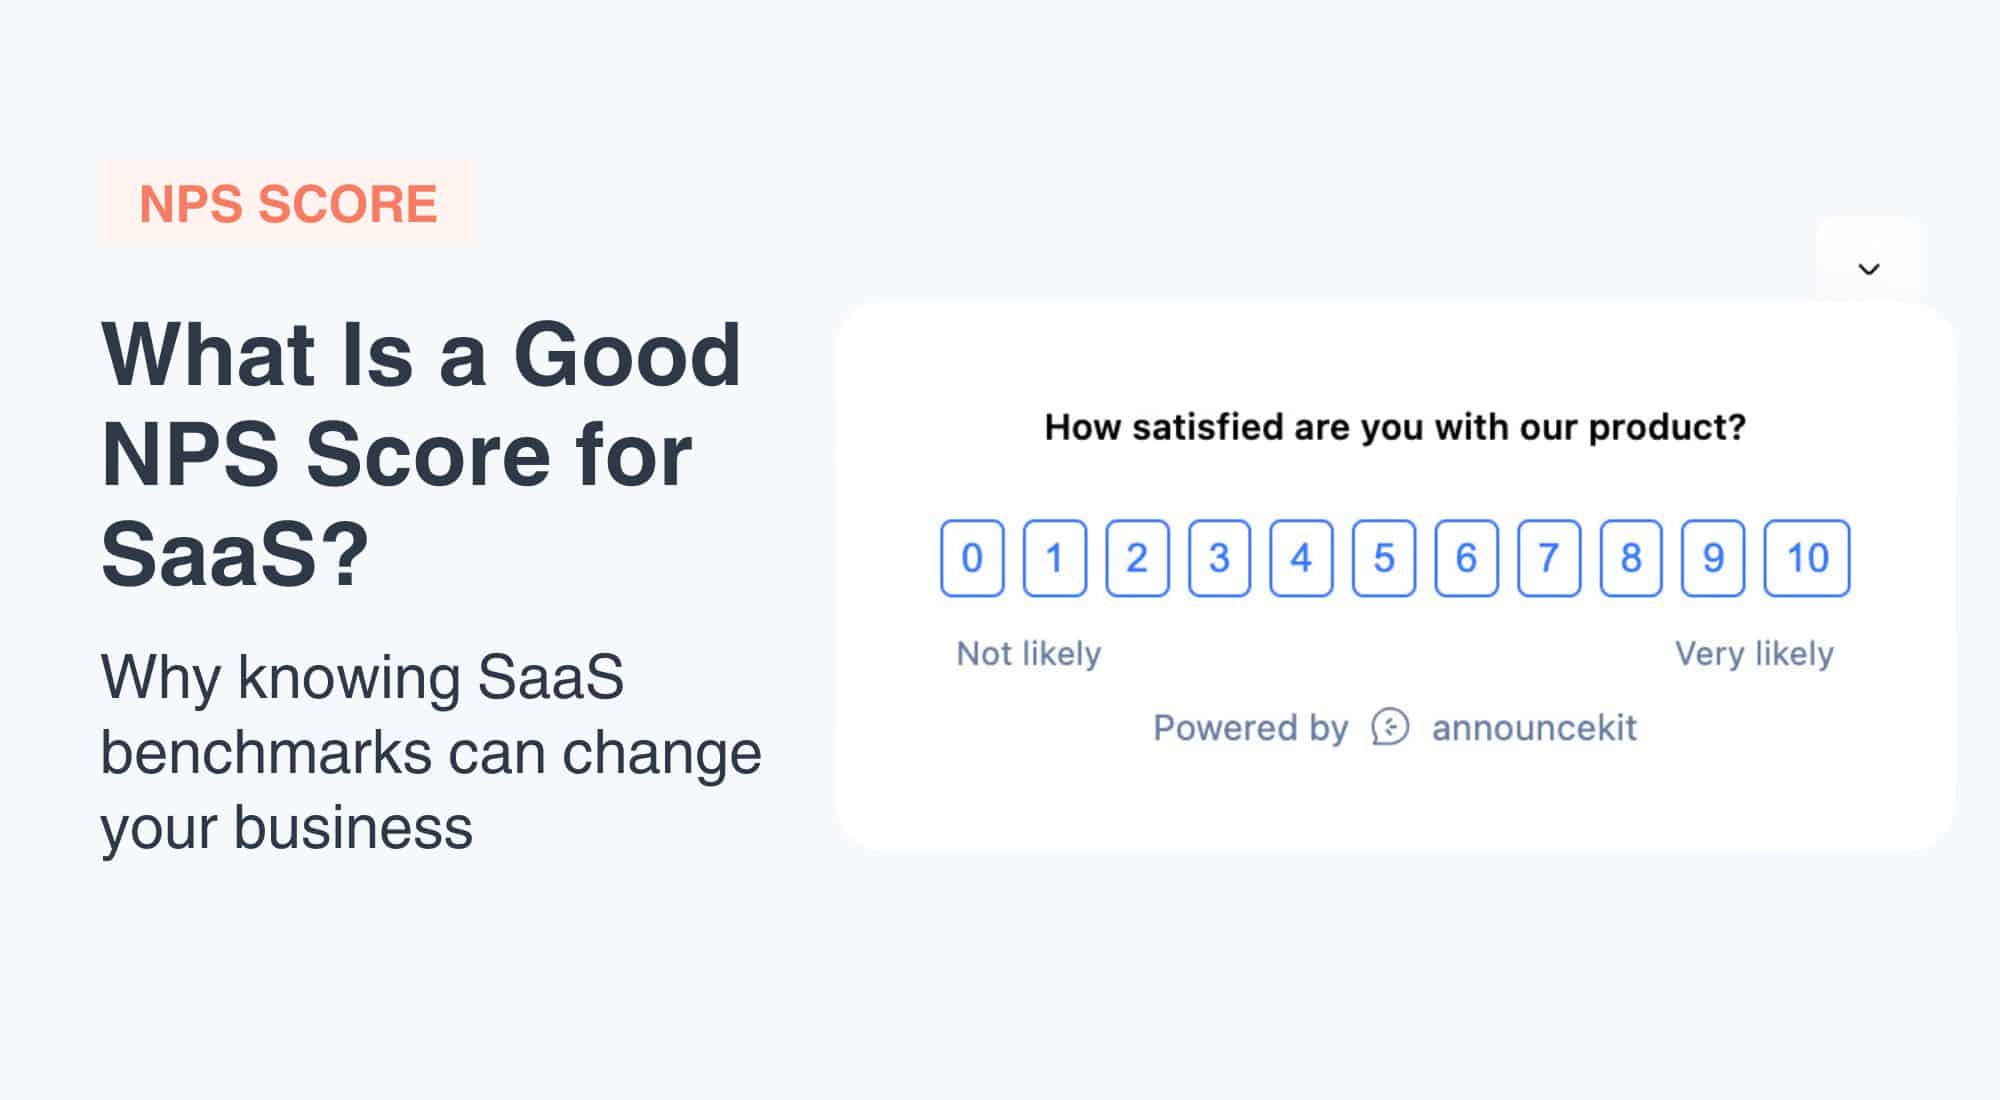 What Is a Good NPS Score for SaaS